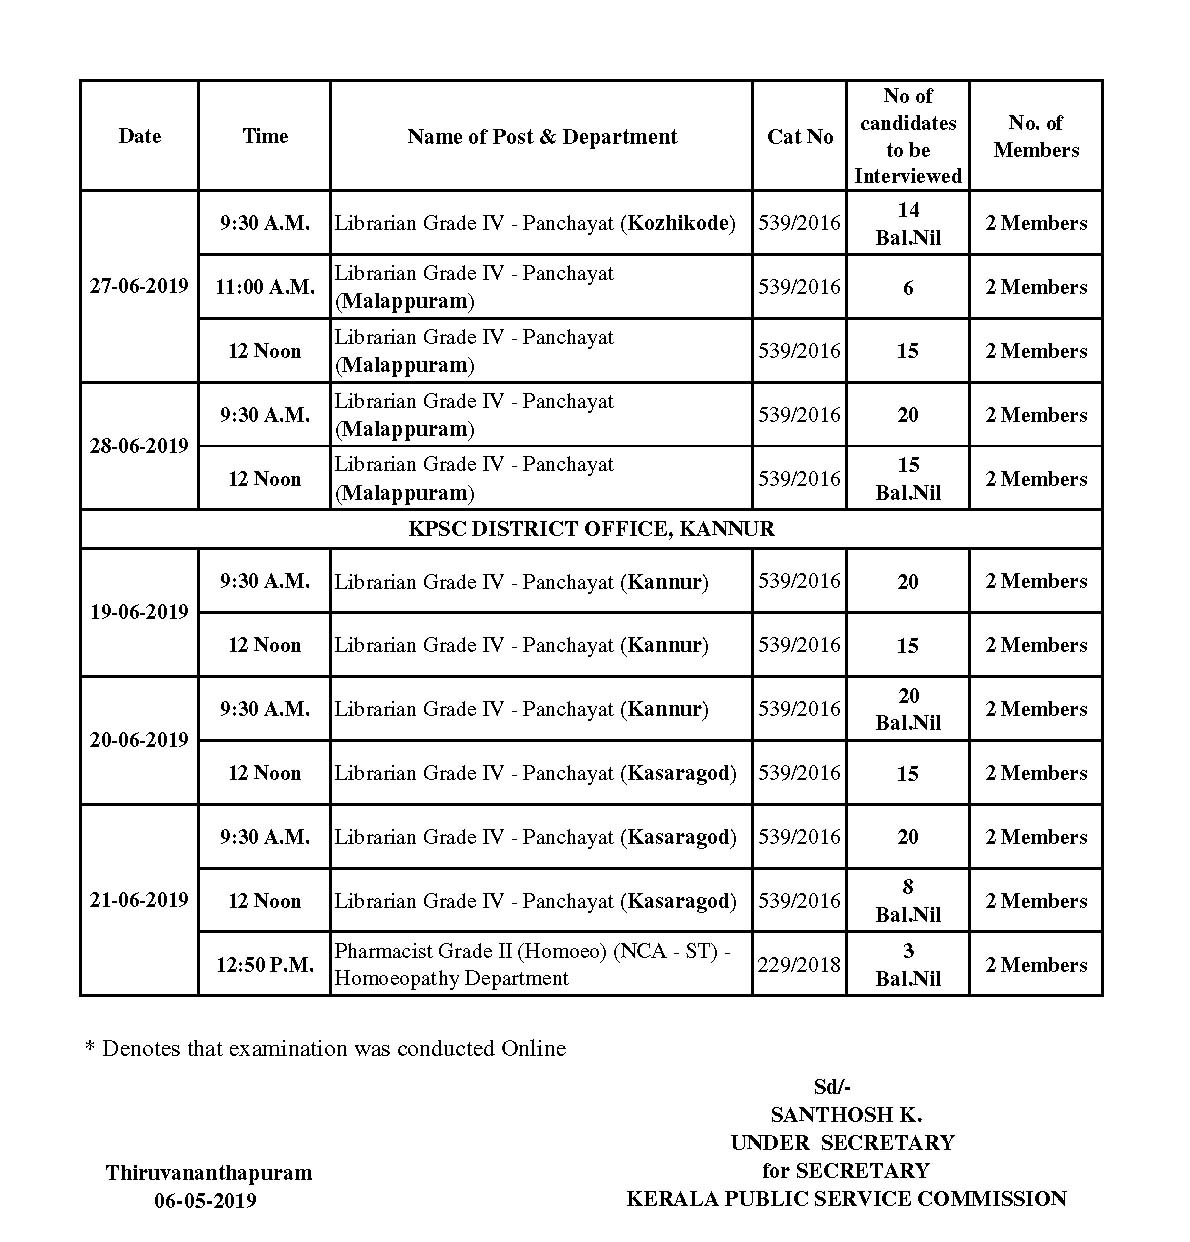 KPSC Interview Programme For The Month Of June 2019 - Notification Image 7